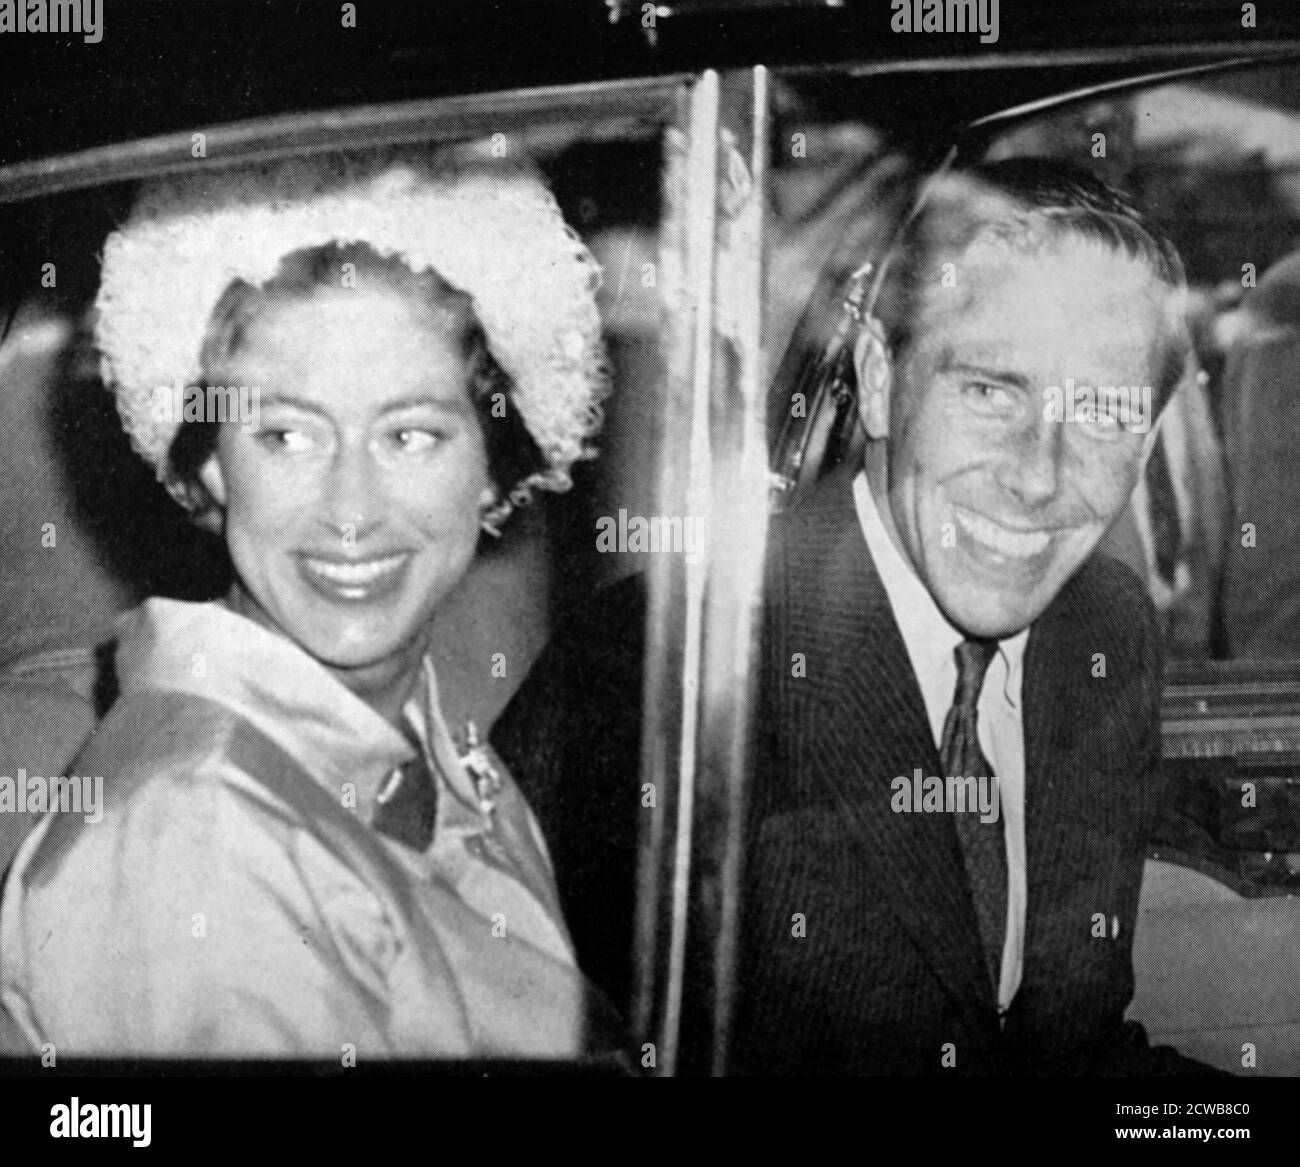 Princess Margaret, Countess of Snowdon, (1930 - 2002) with her husband Anthony Armstrong Jones 1960. Margaret was the younger daughter of King George VI and Queen Elizabeth, and the only sibling of Queen Elizabeth II. Stock Photo